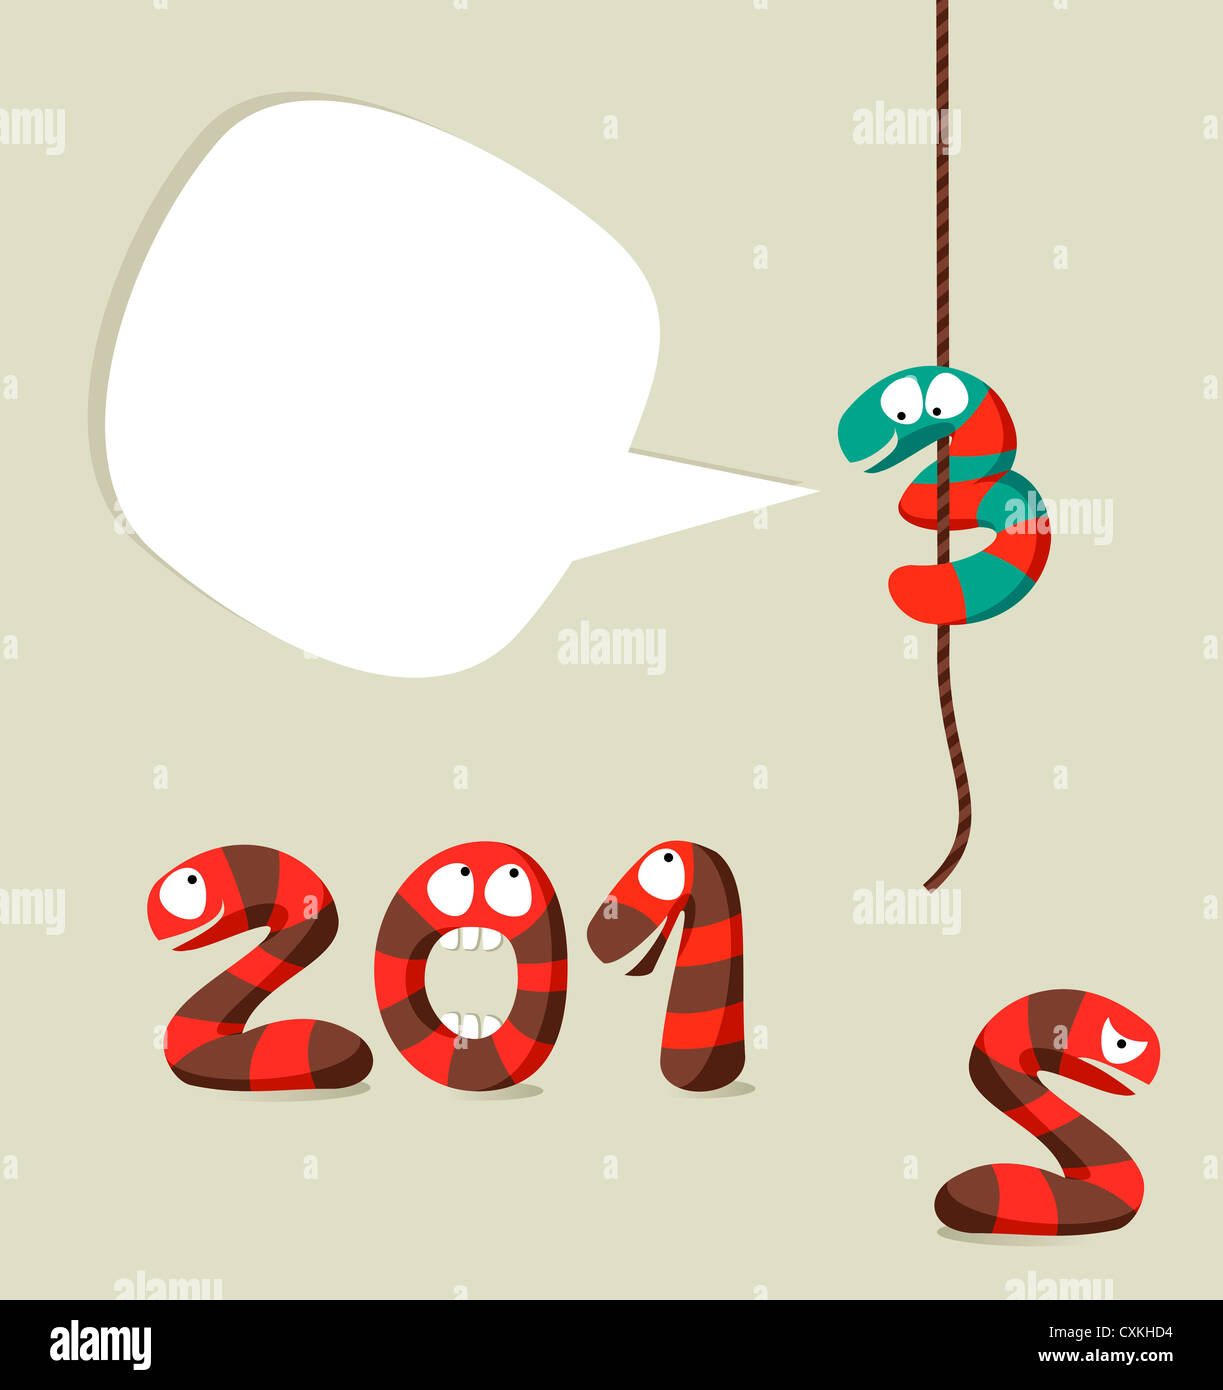 Funny cartoon snakes monsters celebrating the beginning of the new year greeting card template. Vector illustration layered for easy manipulation and custom coloring. Stock Photo